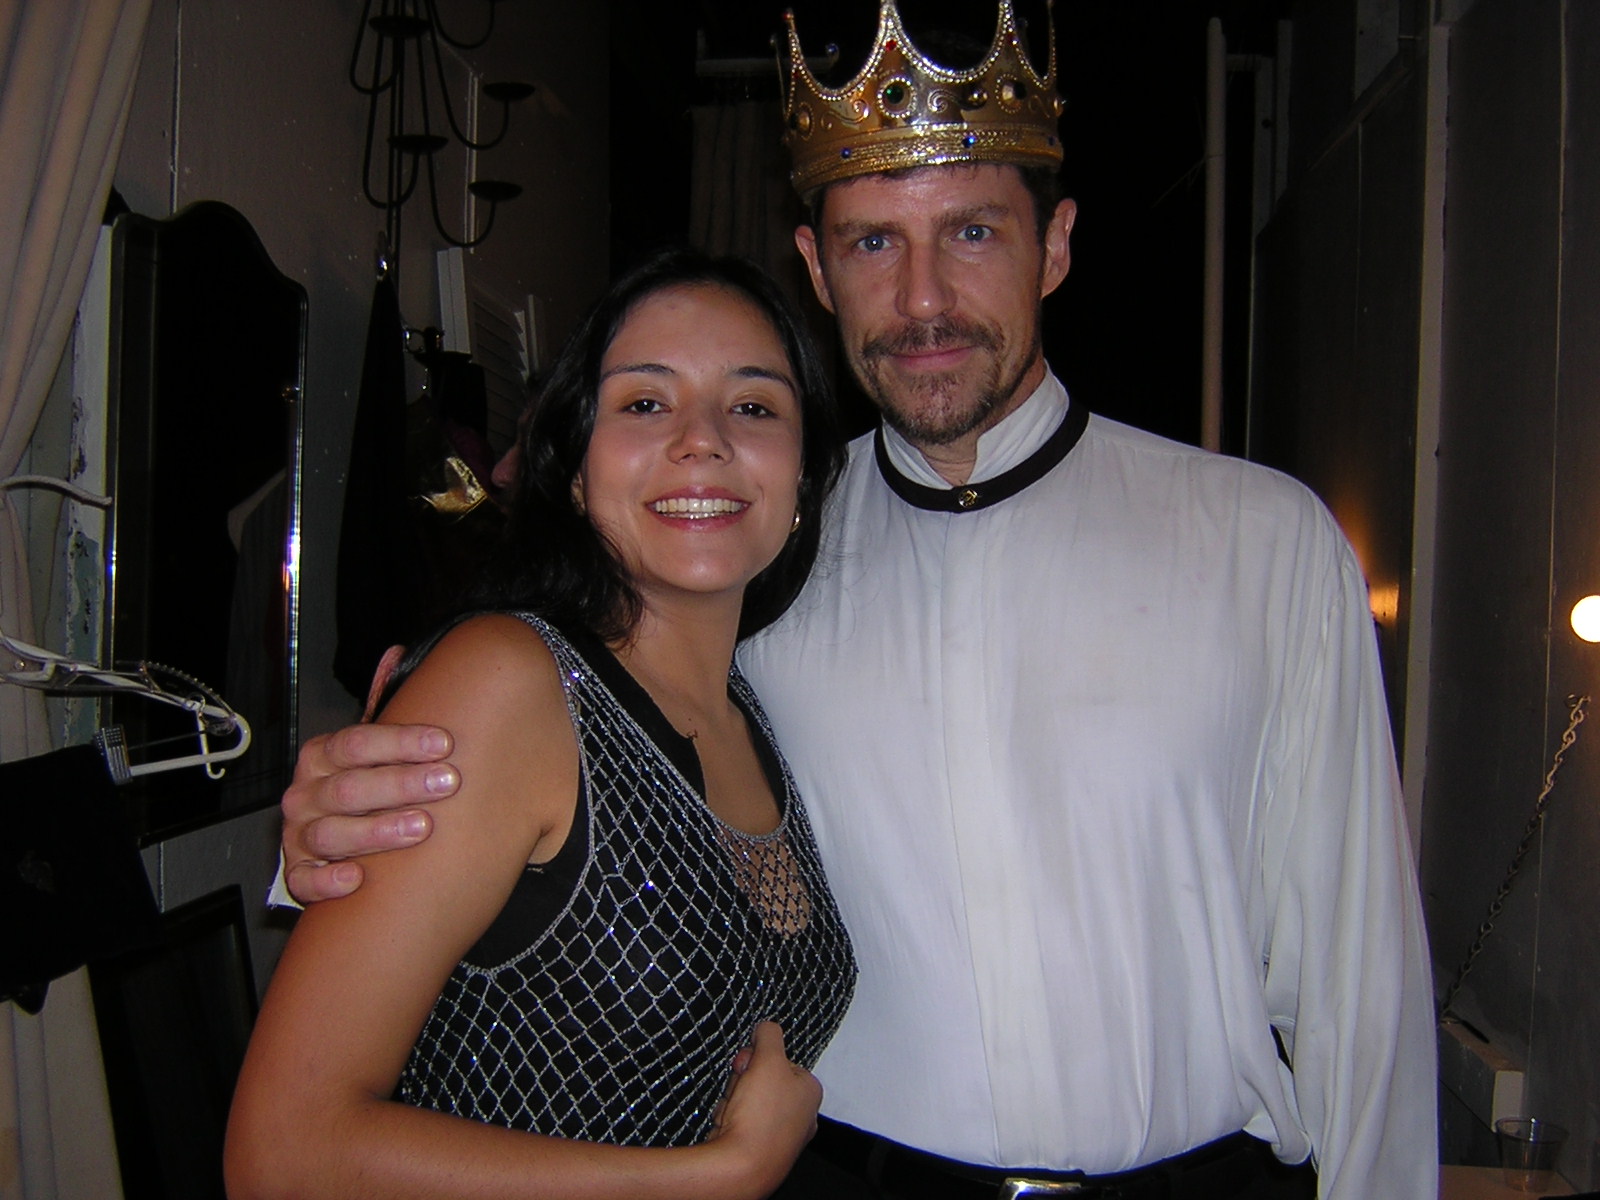 Catalina Sandino Moreno (Academy Award Nominee for Best Actress for her role in Maria Full of Grace, 2004) & Jerry Griffin after a performance of King John in New York City.